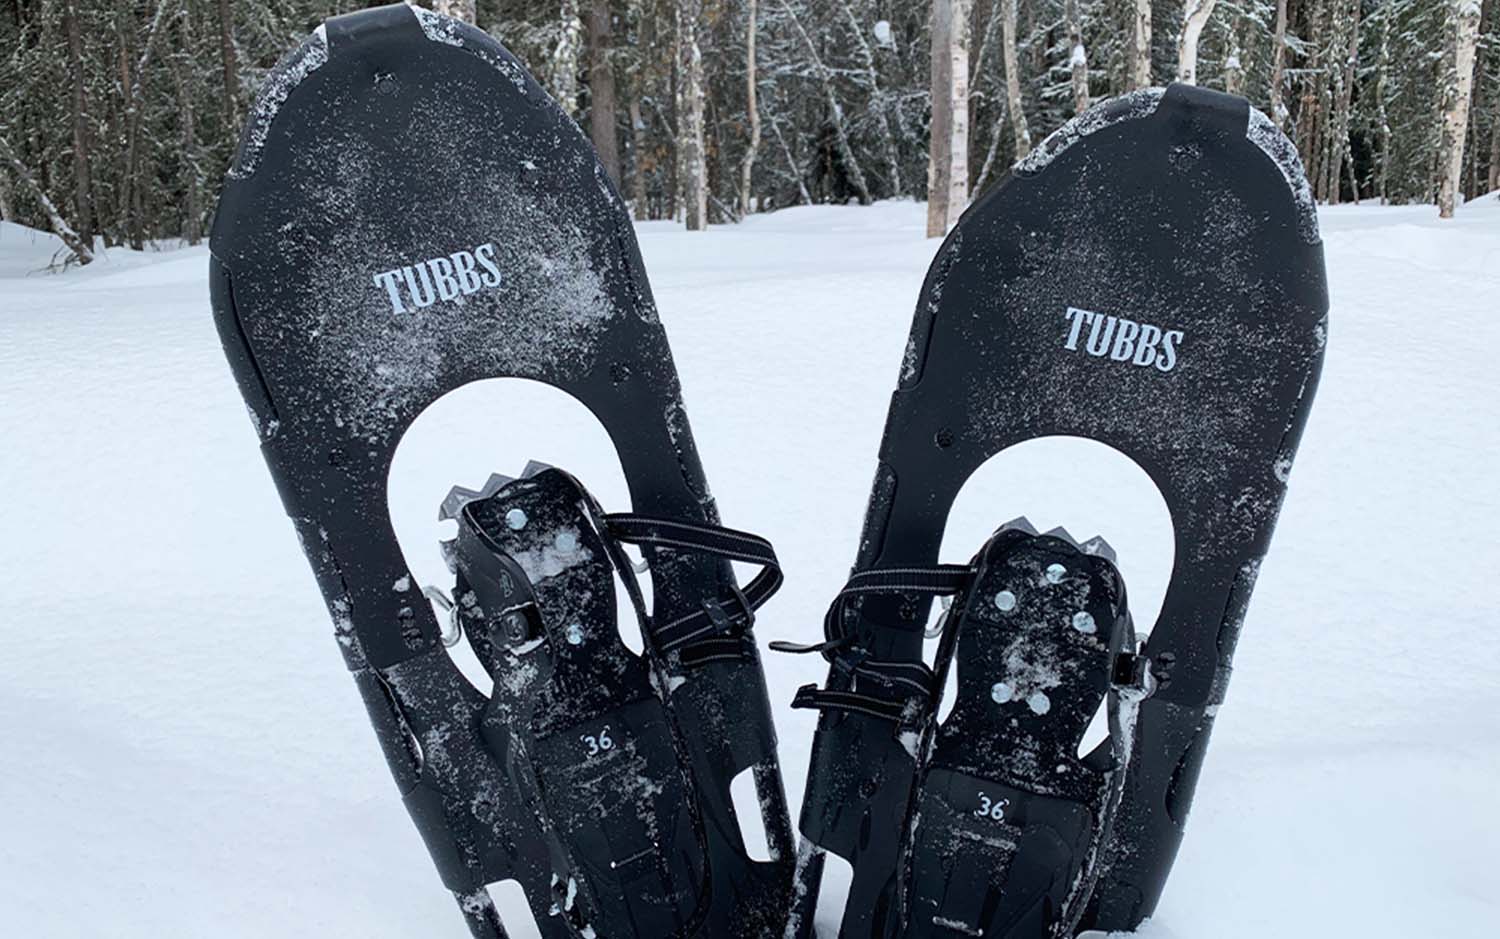 A pair of black snowshoes standing in the snow